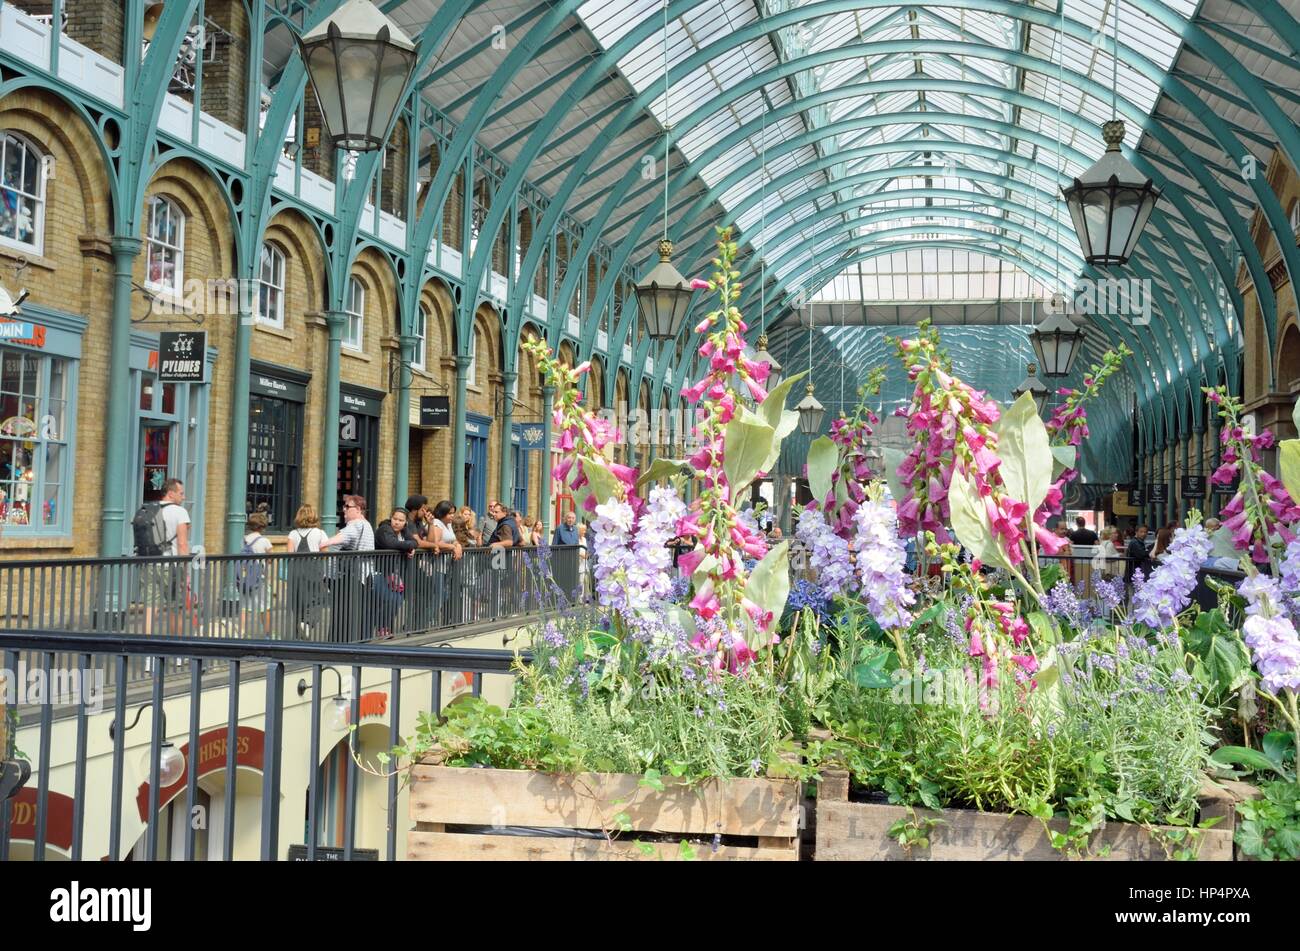 Covent Garden London England, United Kingdom - August 16, 2016: Central Piazza Convent Garden with Flowers in Foreground Stock Photo